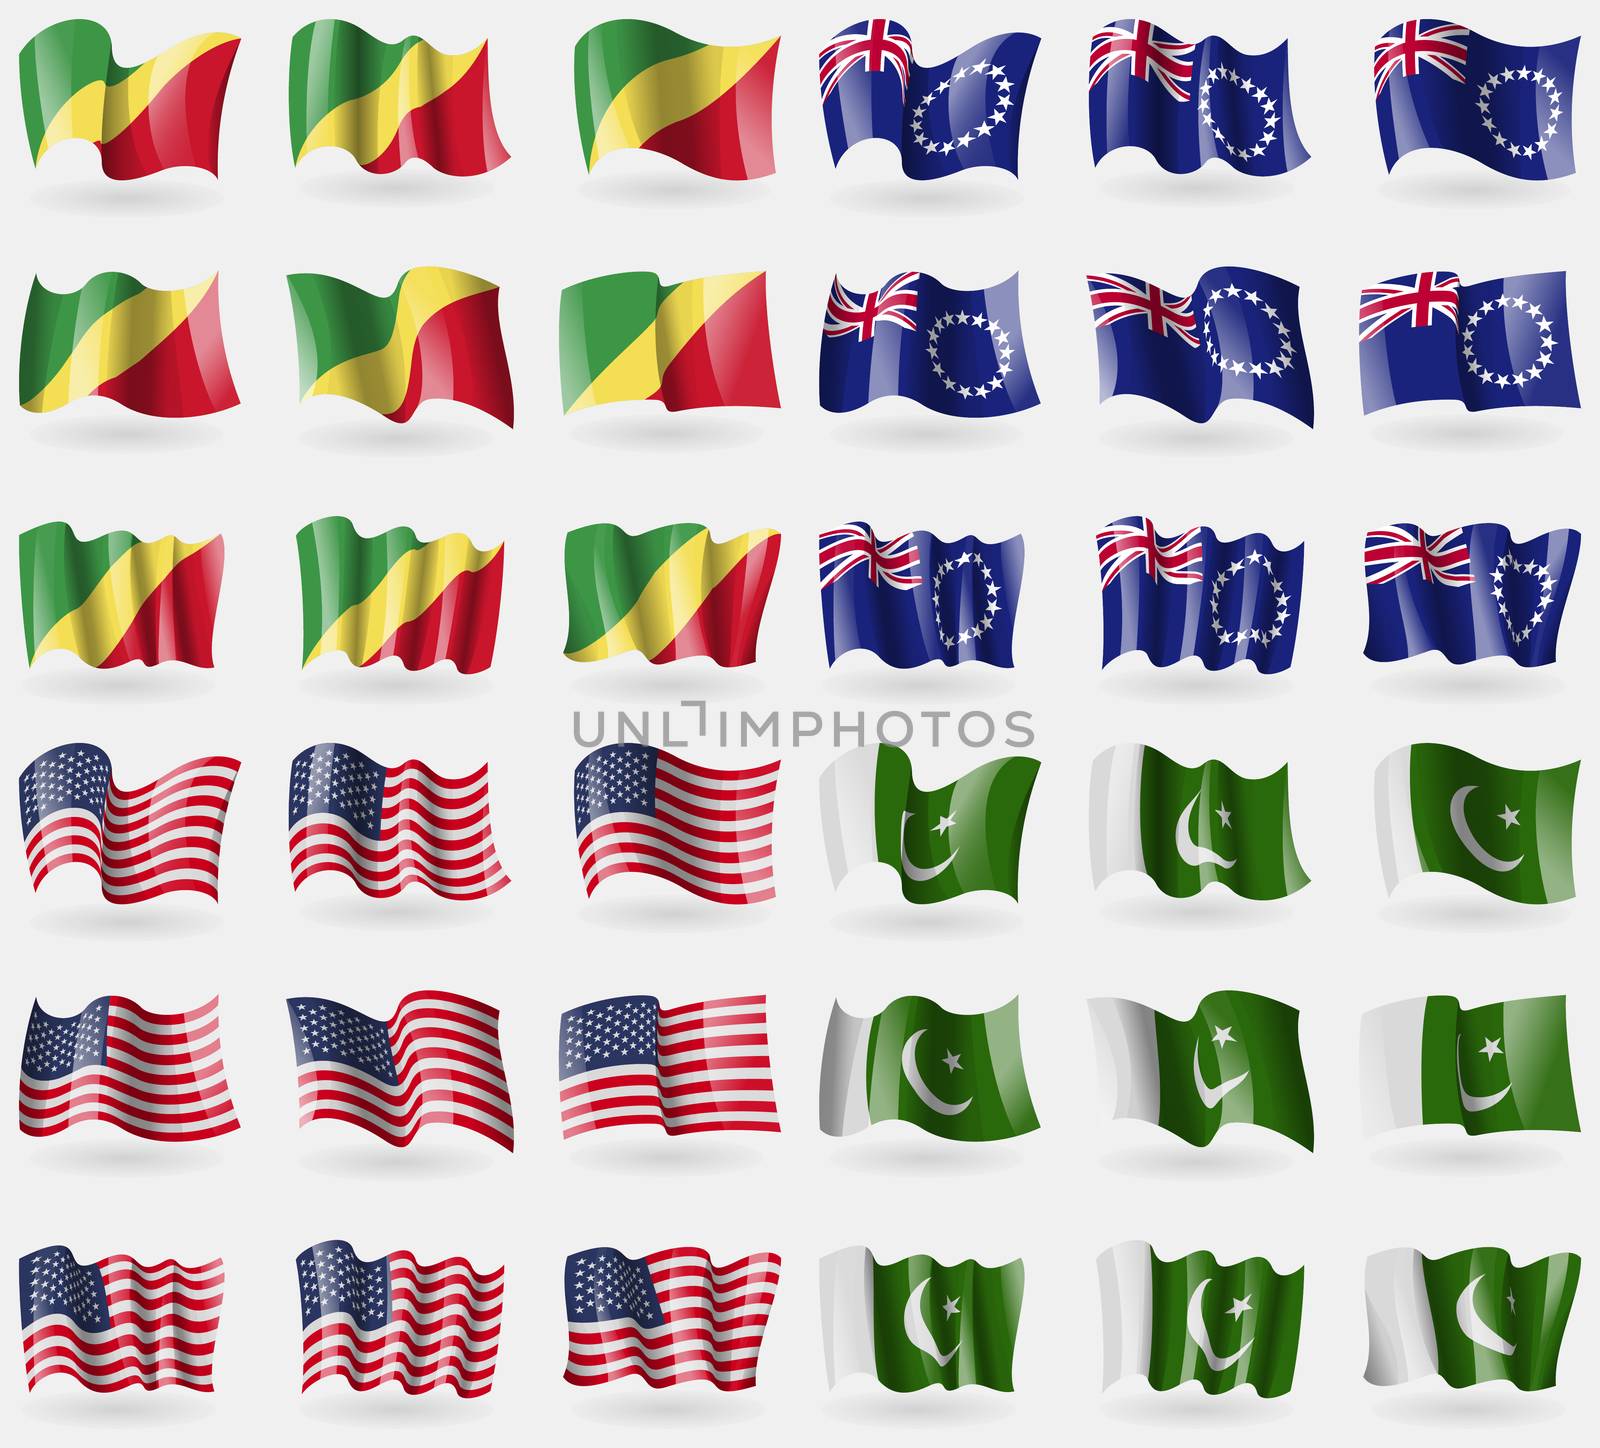 Congo Republic, Cook Islands, USA, Pakistan. Set of 36 flags of the countries of the world. illustration